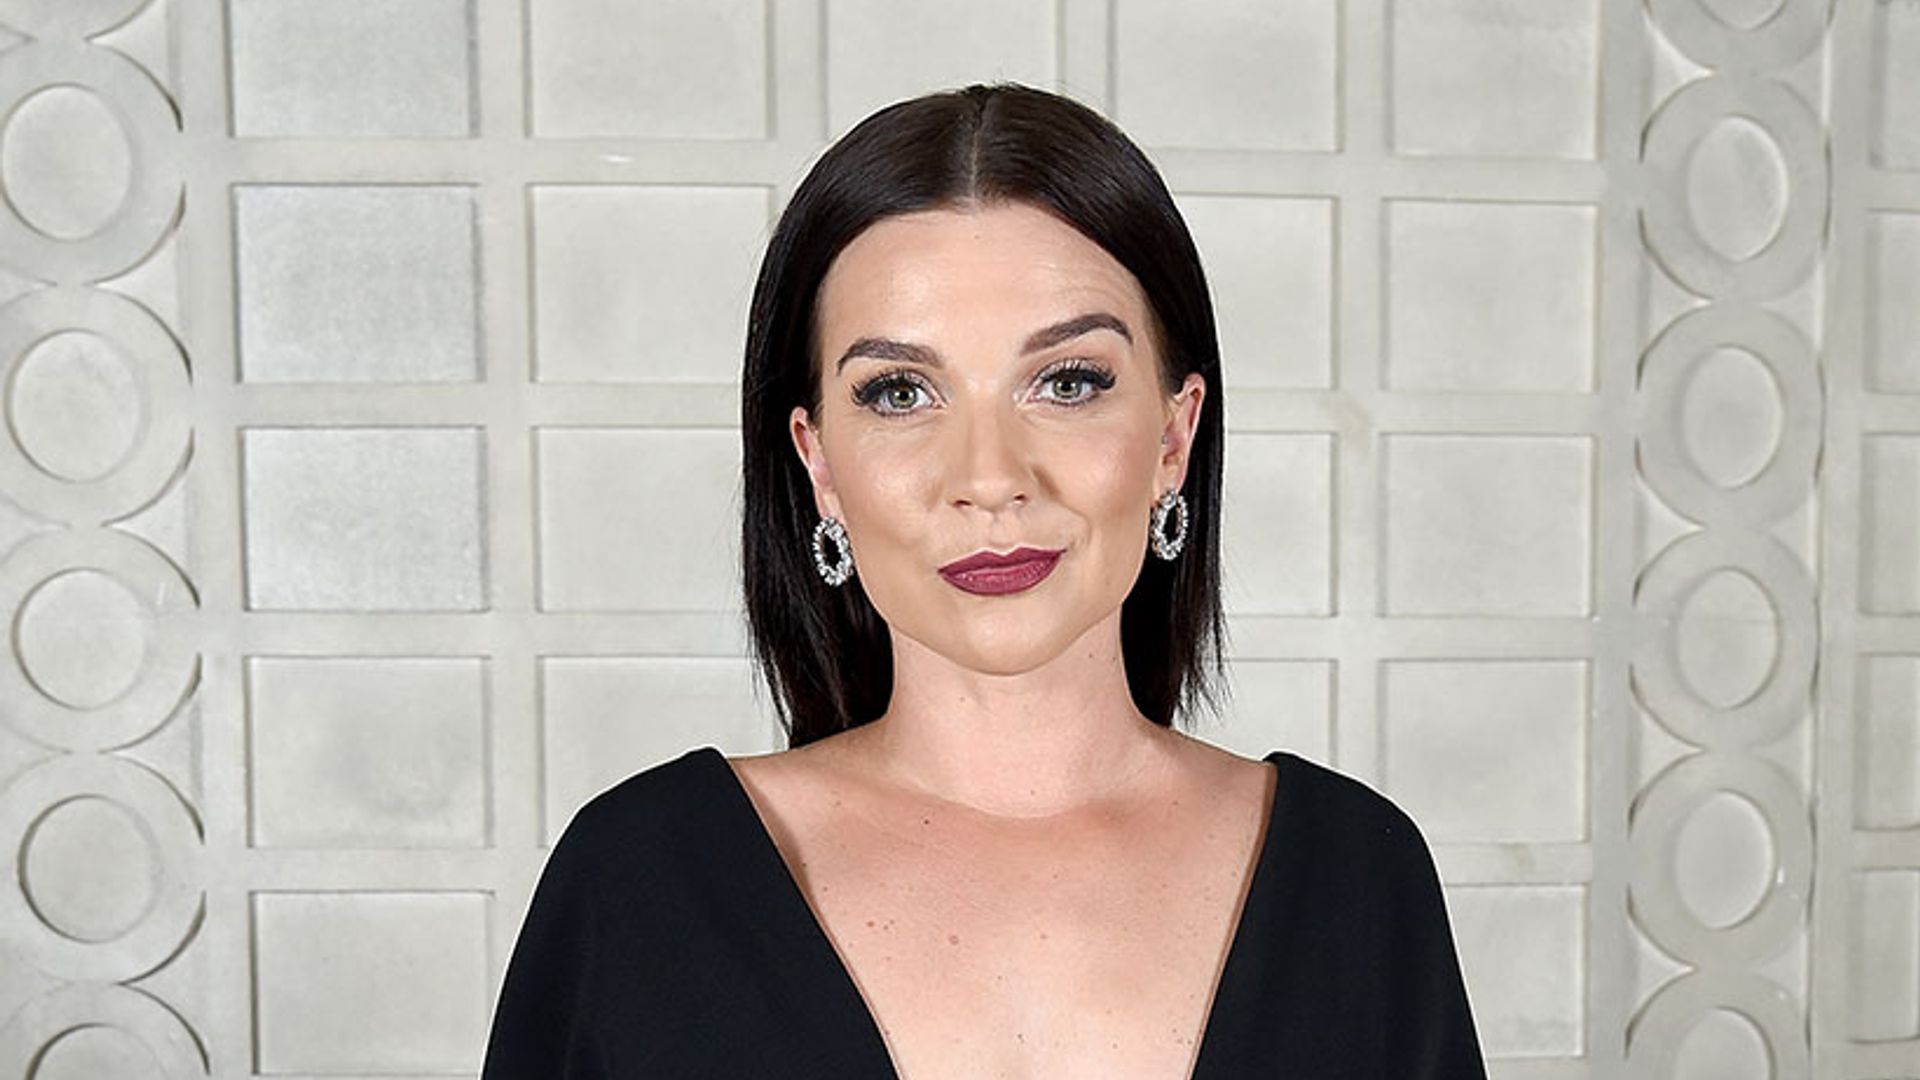 Great British Bake Off winner Candice Brown welcomes new family member ...